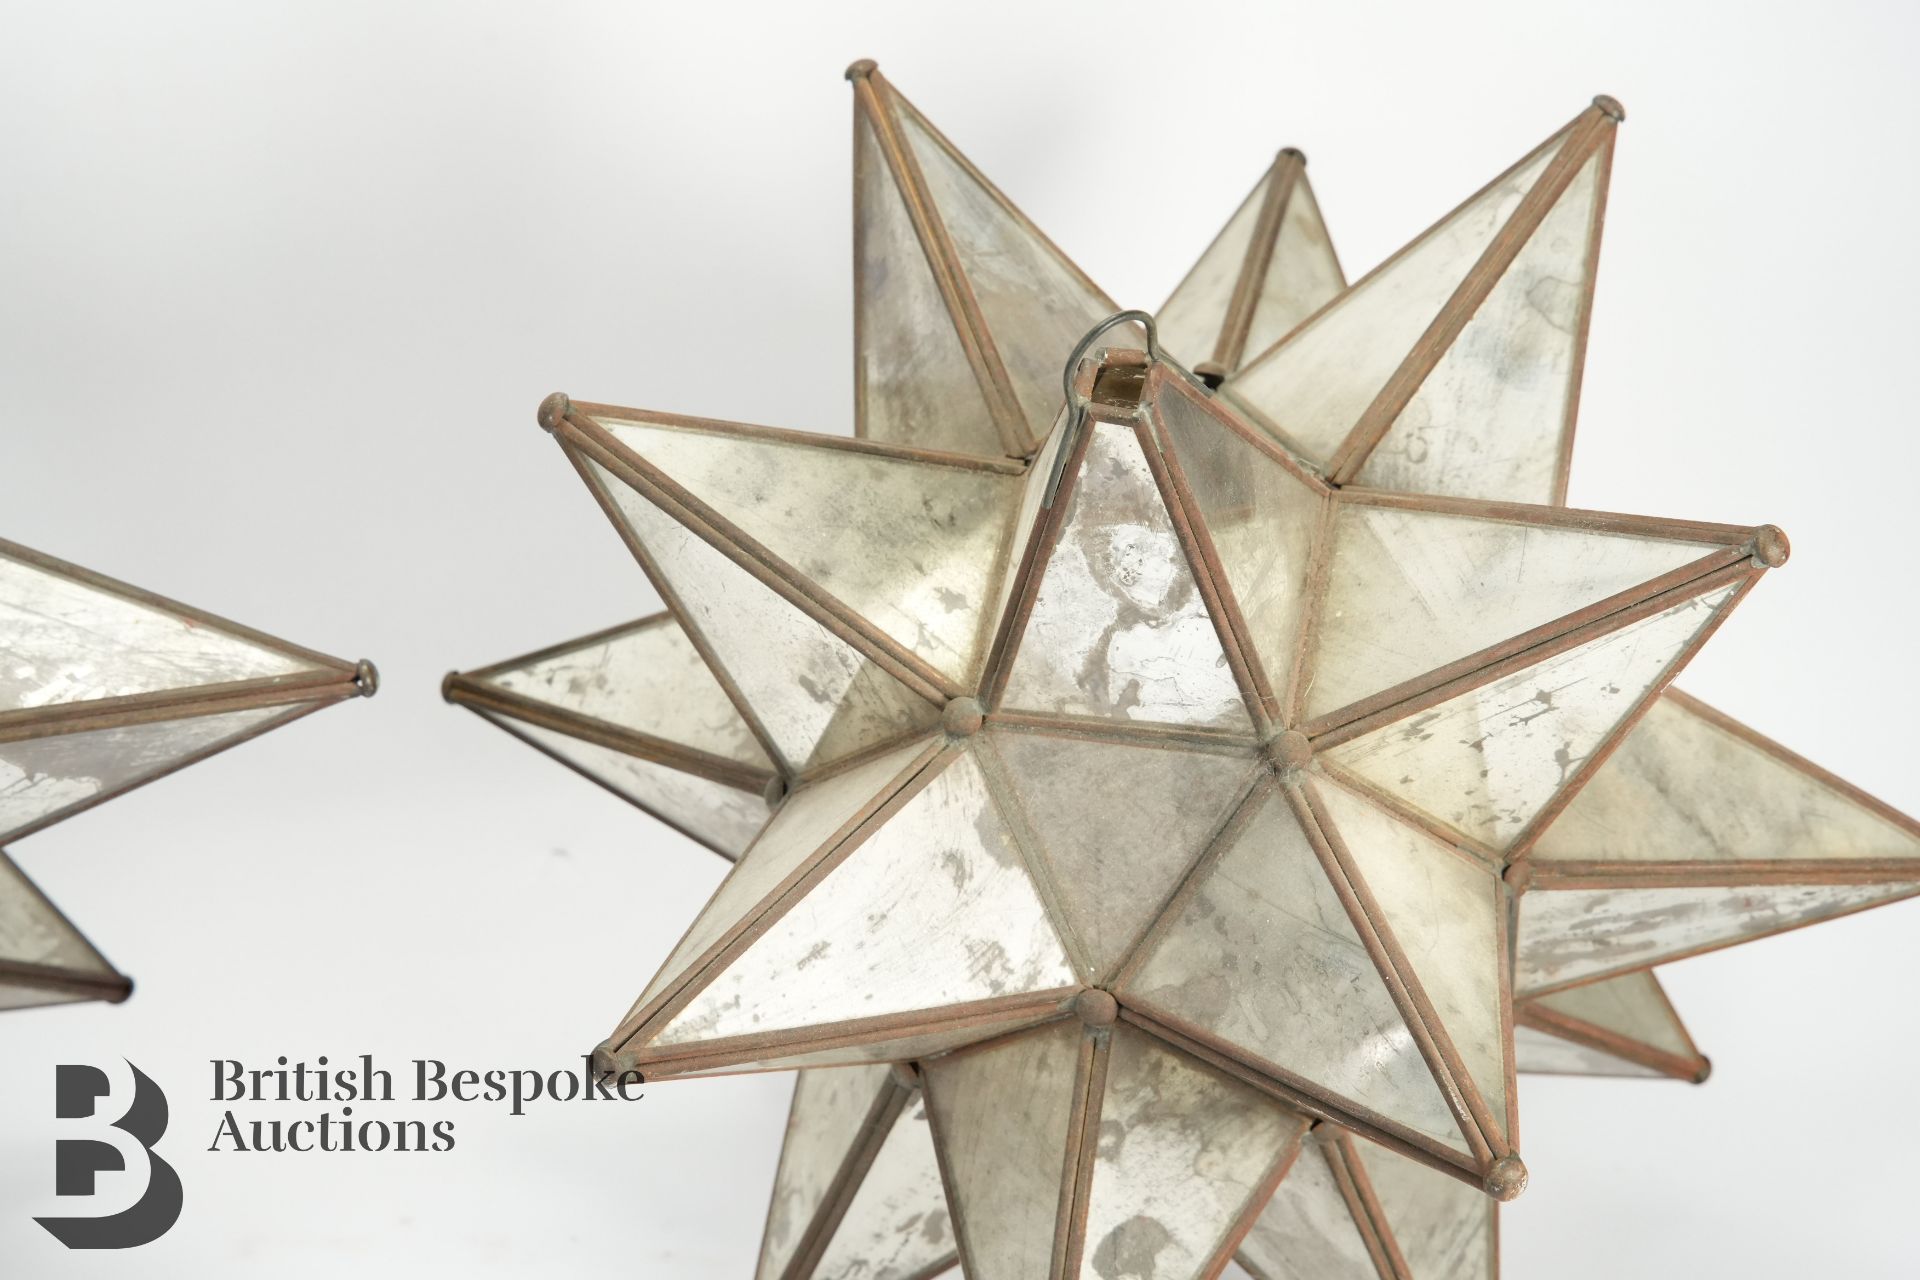 Two Mexican Frosted Glass Star Pendant Lamp Shades - Image 3 of 4